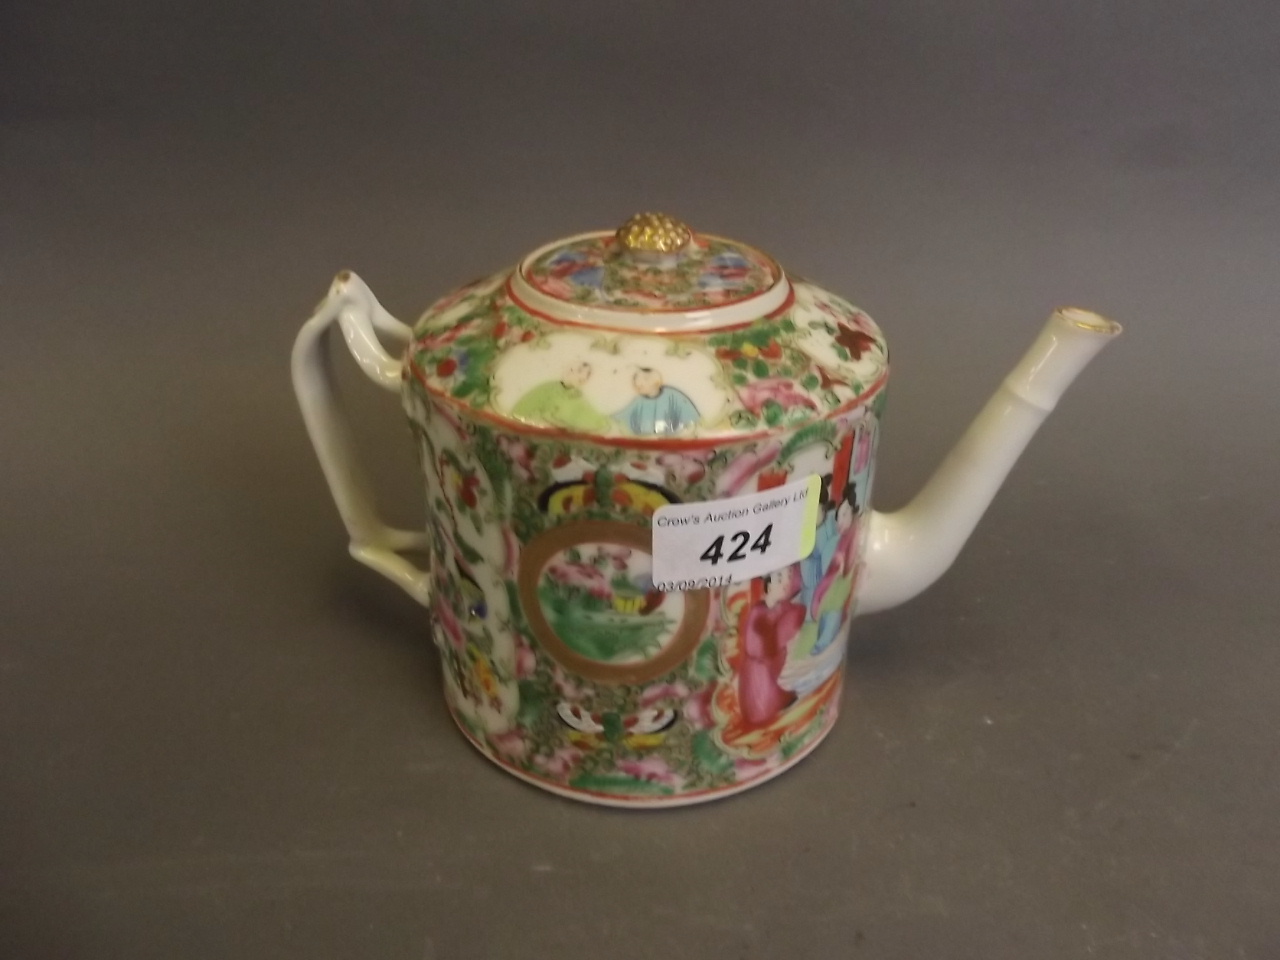 A C19th Cantonese teapot and cover, 5" high